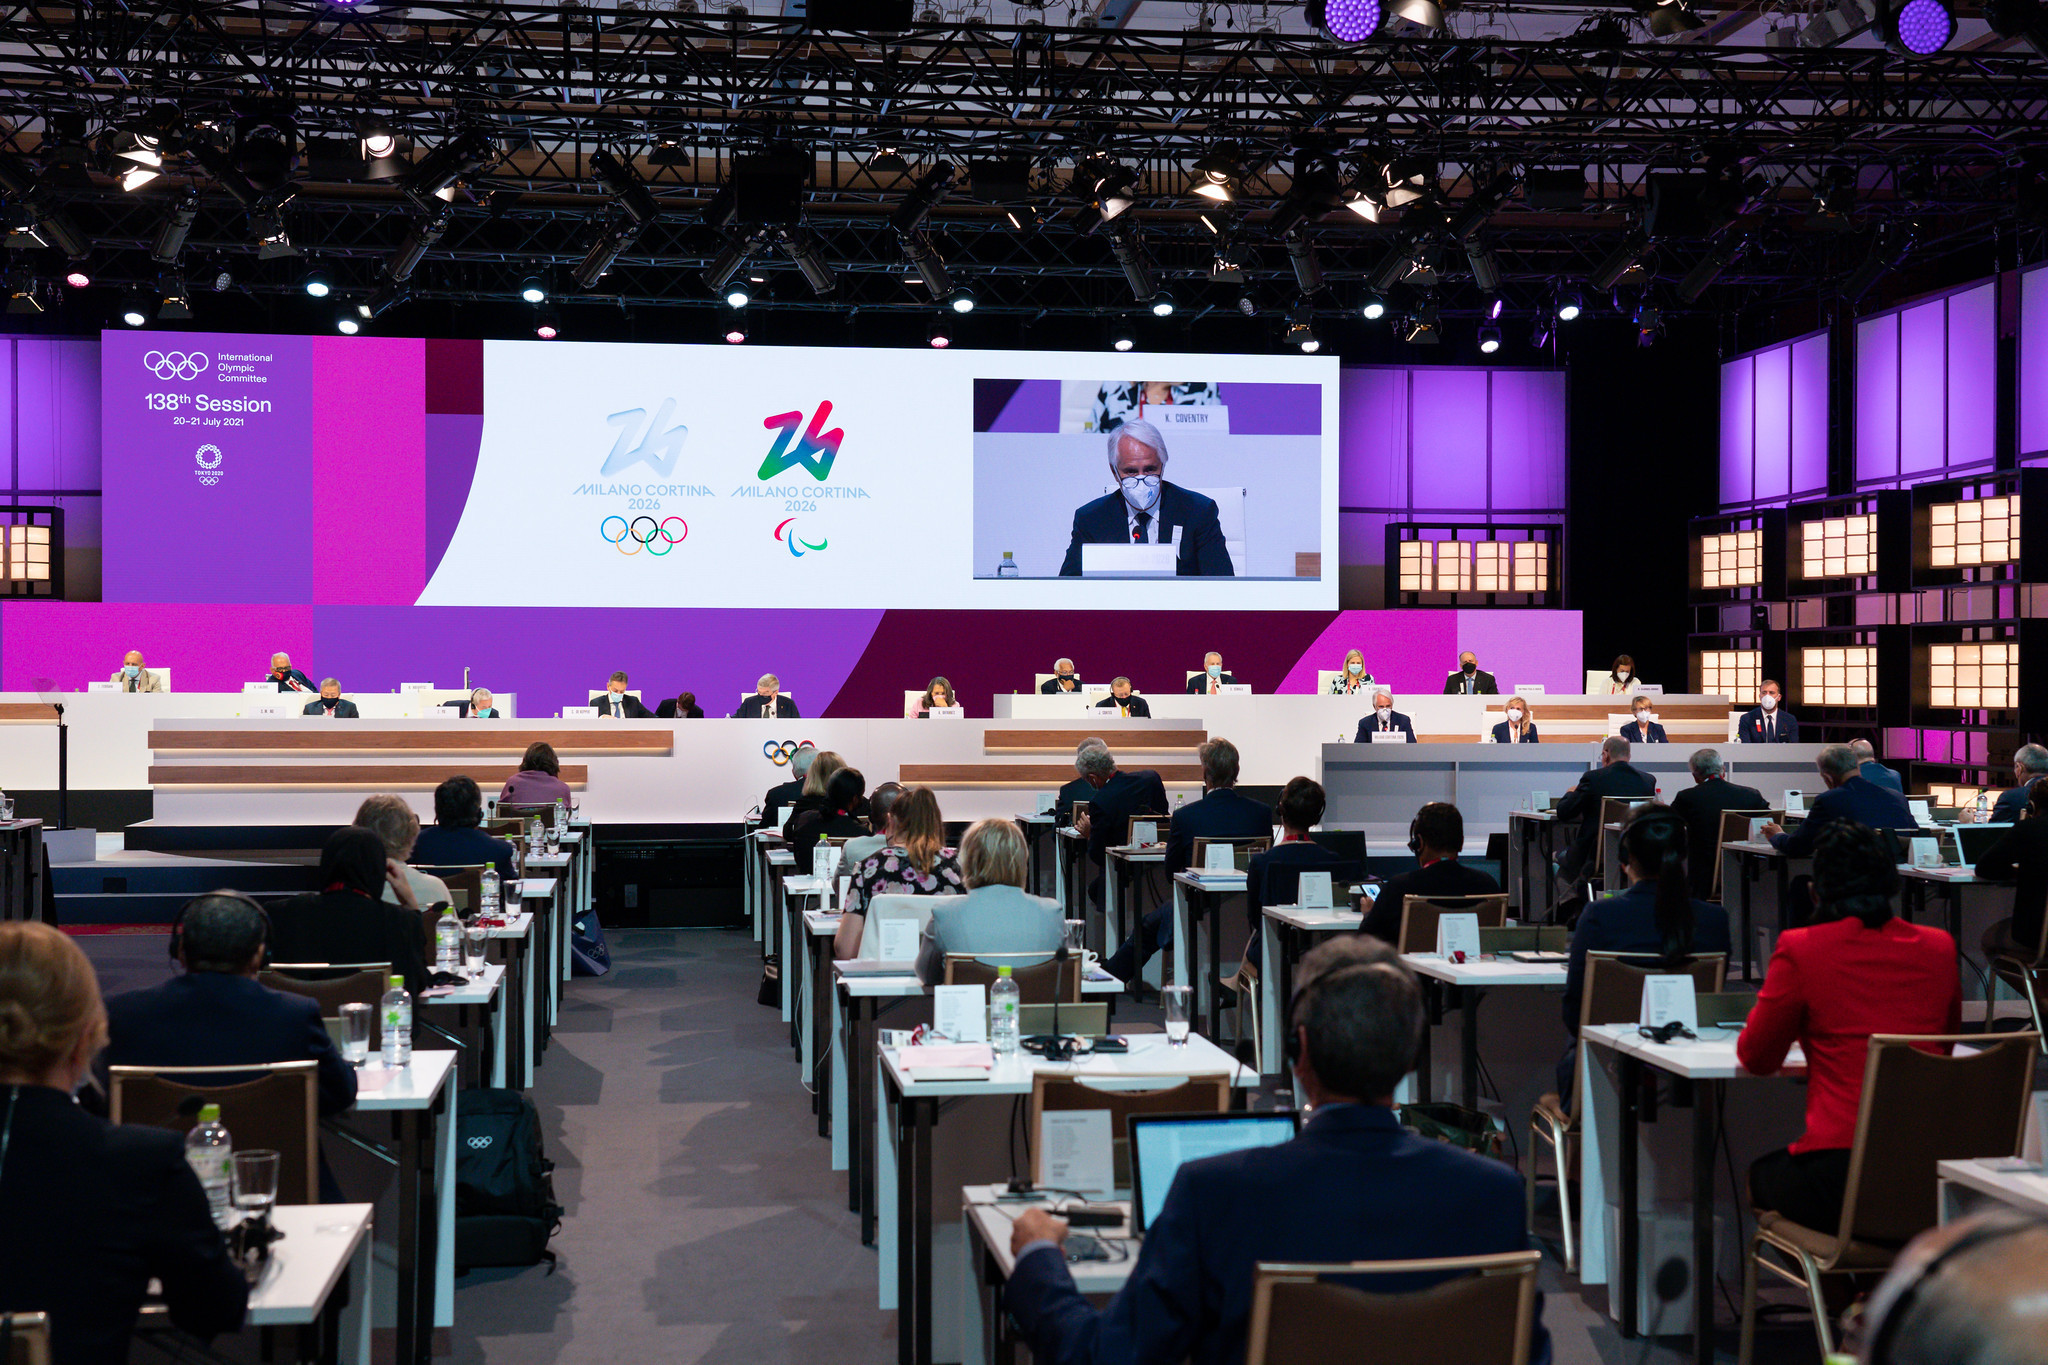 Milan Cortina 2026 presented their latest update 
for the Winter Olympics ©IOC